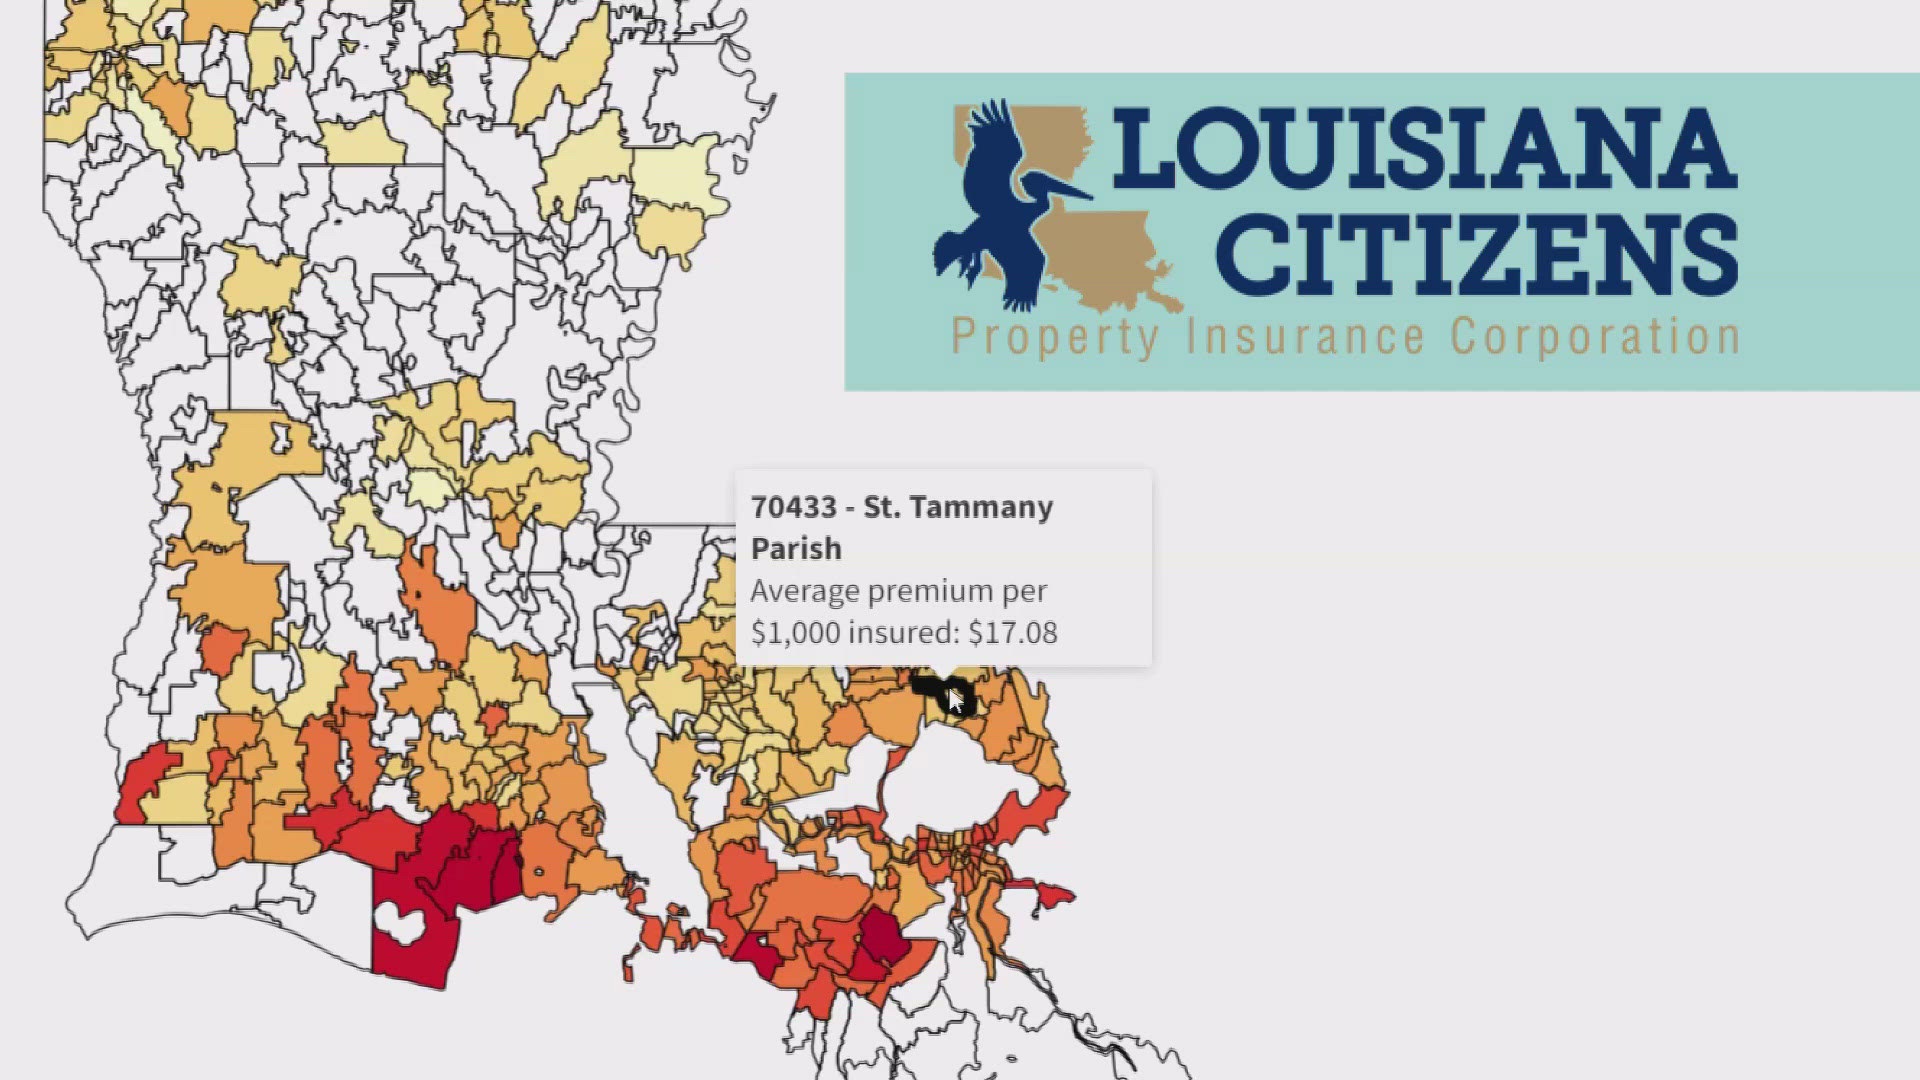 WWL Louisiana obtained data on thousands of Louisiana Citizens Property Insurance Corporation policies through a public records request.